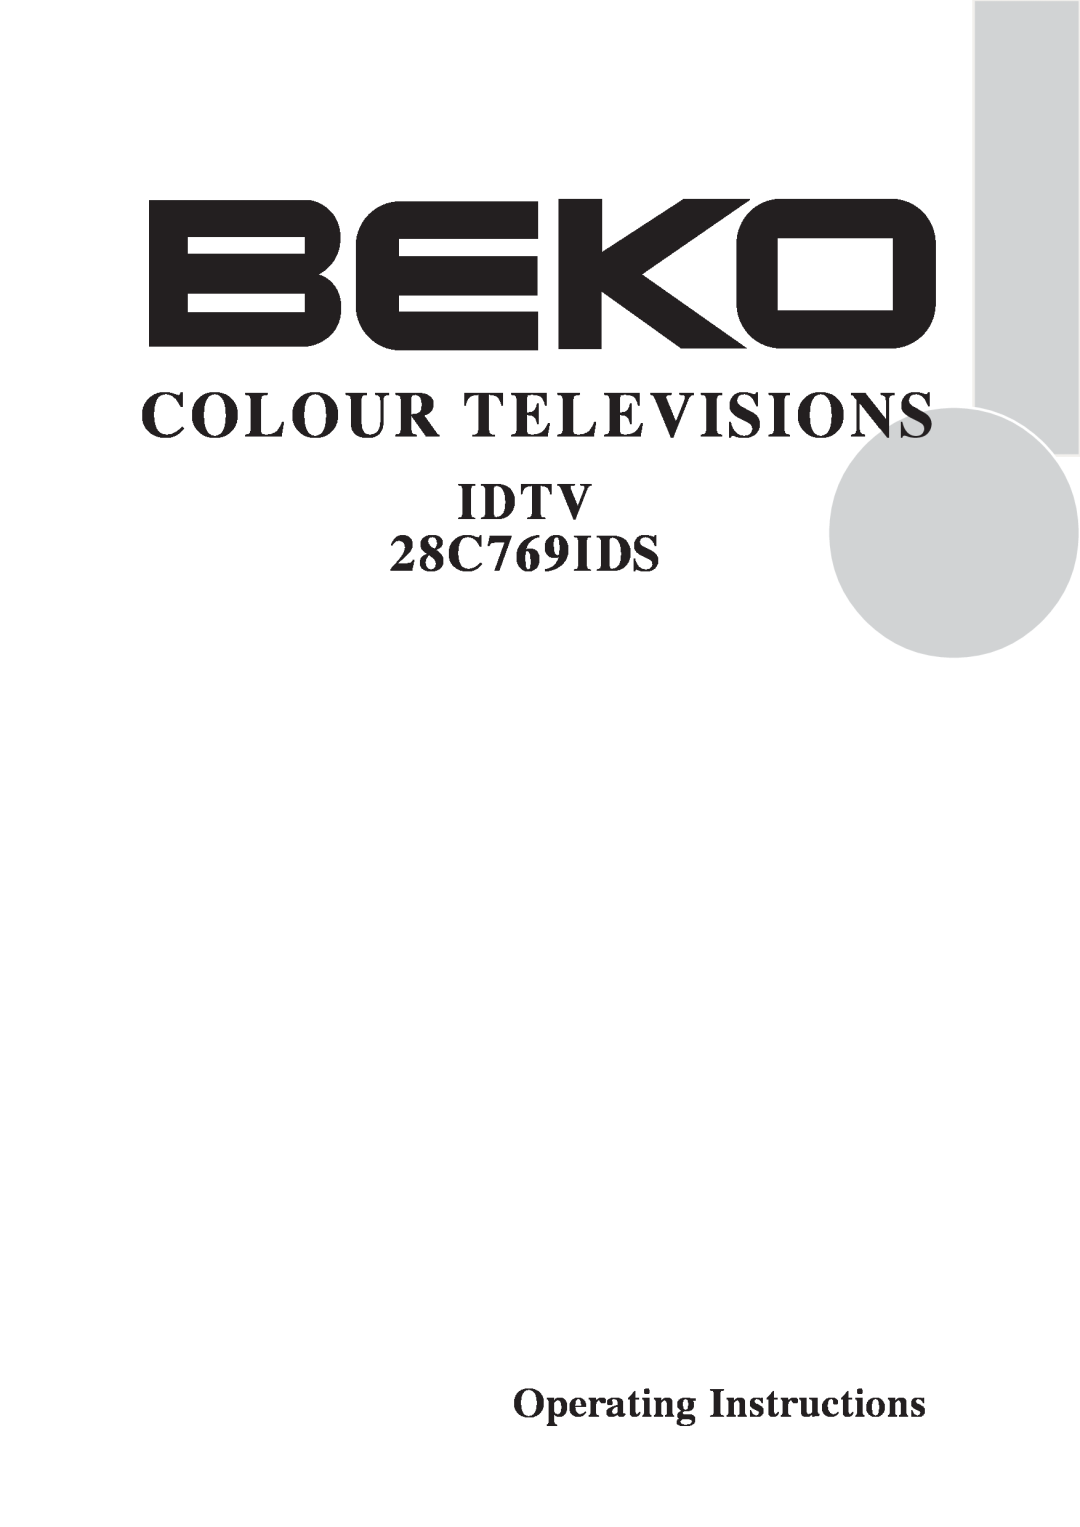 Beko operating instructions Operating Instructions, Colour Televisions, IDTV 28C769IDS 